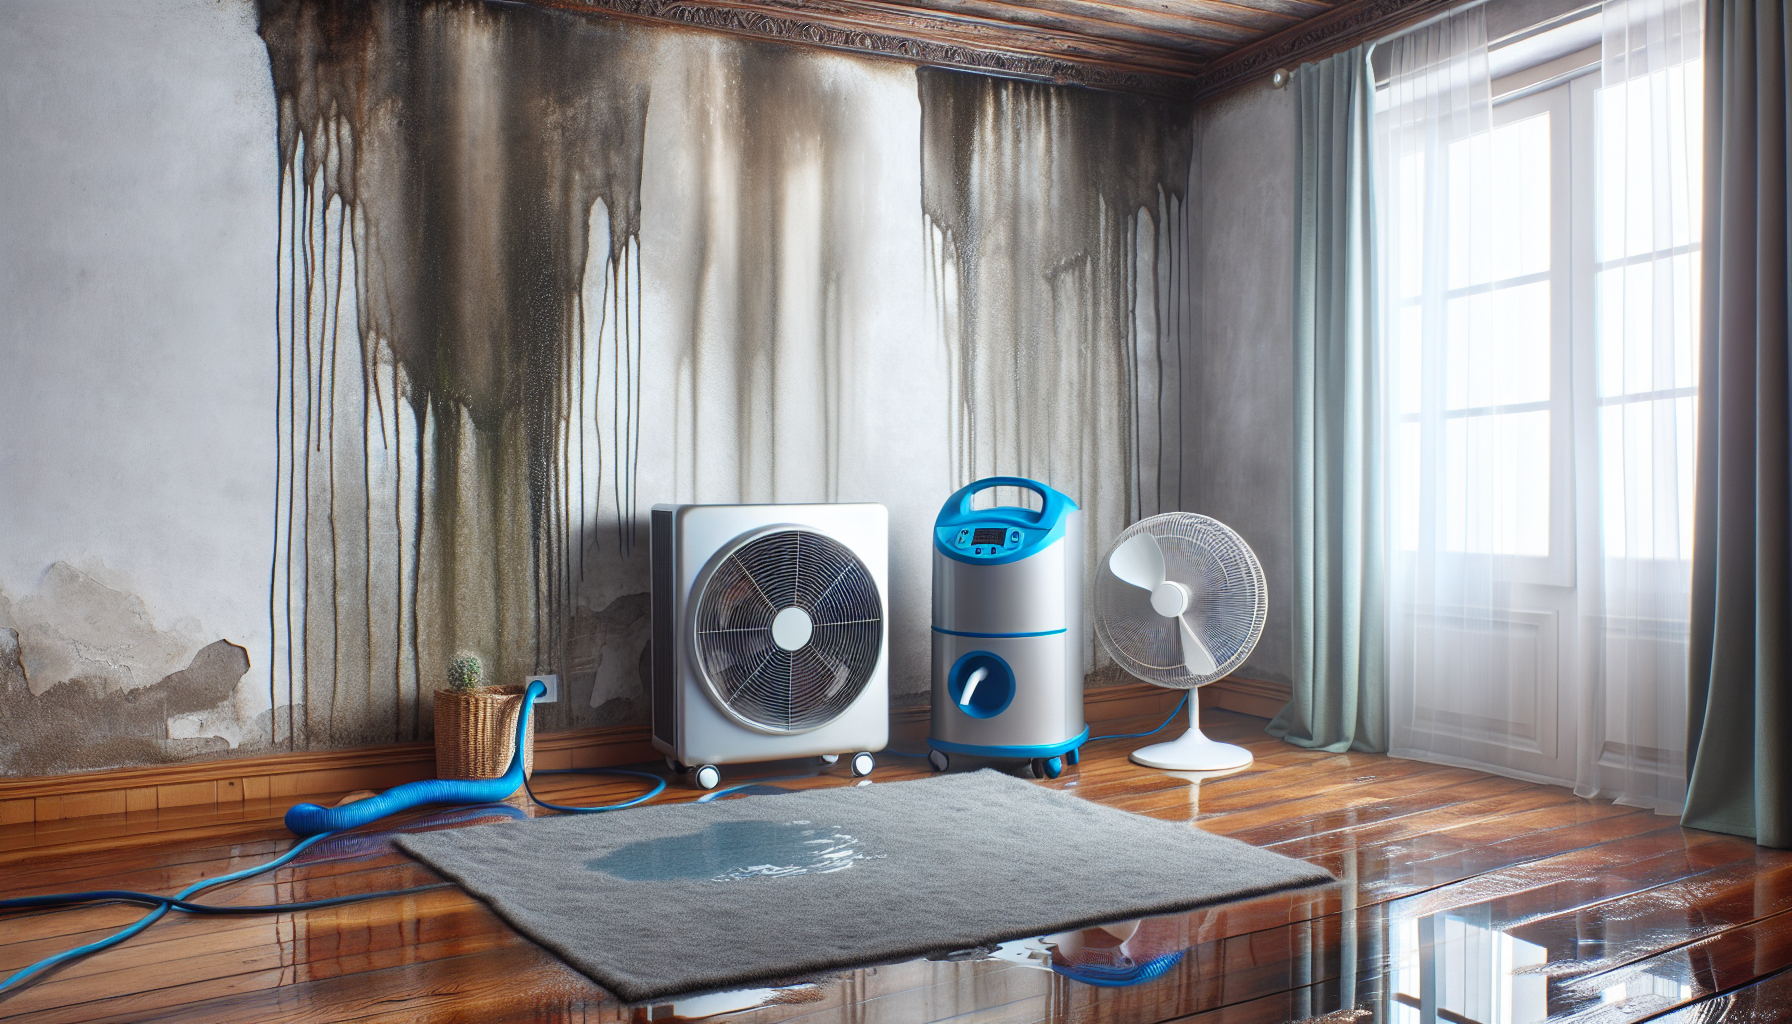 Dehumidifier and fans working together in a water-damaged space